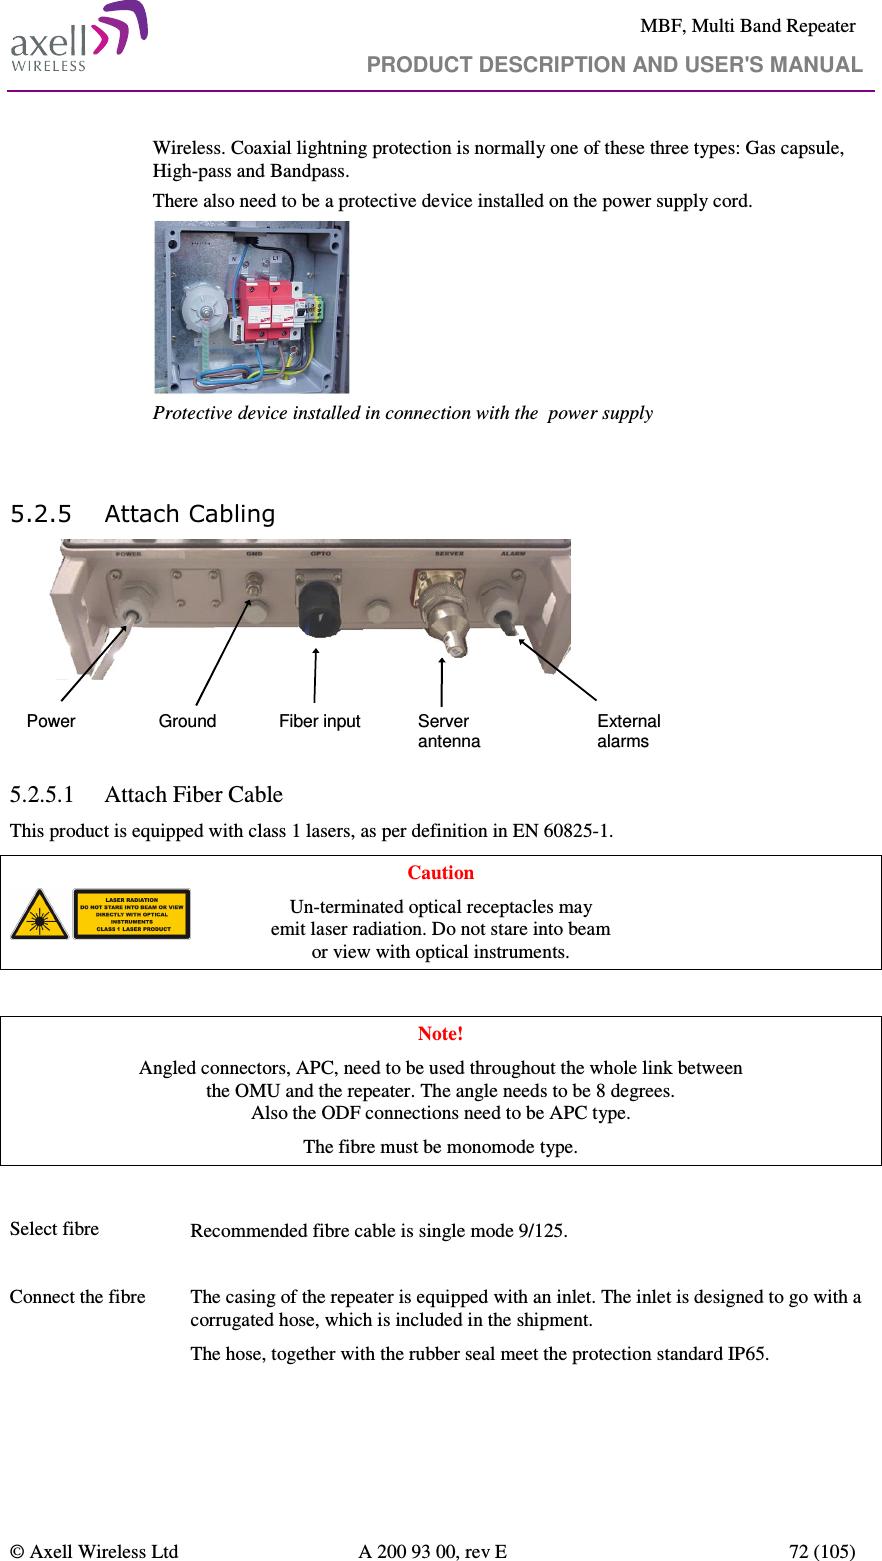     MBF, Multi Band Repeater                                     PRODUCT DESCRIPTION AND USER&apos;S MANUAL   © Axell Wireless Ltd  A 200 93 00, rev E  72 (105)       Wireless. Coaxial lightning protection is normally one of these three types: Gas capsule, High-pass and Bandpass. There also need to be a protective device installed on the power supply cord.  Protective device installed in connection with the  power supply   5.2.5 Attach Cabling Power Fiber inputGround Server antennaExternal alarms 5.2.5.1 Attach Fiber Cable This product is equipped with class 1 lasers, as per definition in EN 60825-1.  Caution Un-terminated optical receptacles may  emit laser radiation. Do not stare into beam  or view with optical instruments.  Note! Angled connectors, APC, need to be used throughout the whole link between  the OMU and the repeater. The angle needs to be 8 degrees.  Also the ODF connections need to be APC type.  The fibre must be monomode type.   Select fibre    Recommended fibre cable is single mode 9/125.  Connect the fibre    The casing of the repeater is equipped with an inlet. The inlet is designed to go with a corrugated hose, which is included in the shipment.  The hose, together with the rubber seal meet the protection standard IP65.   